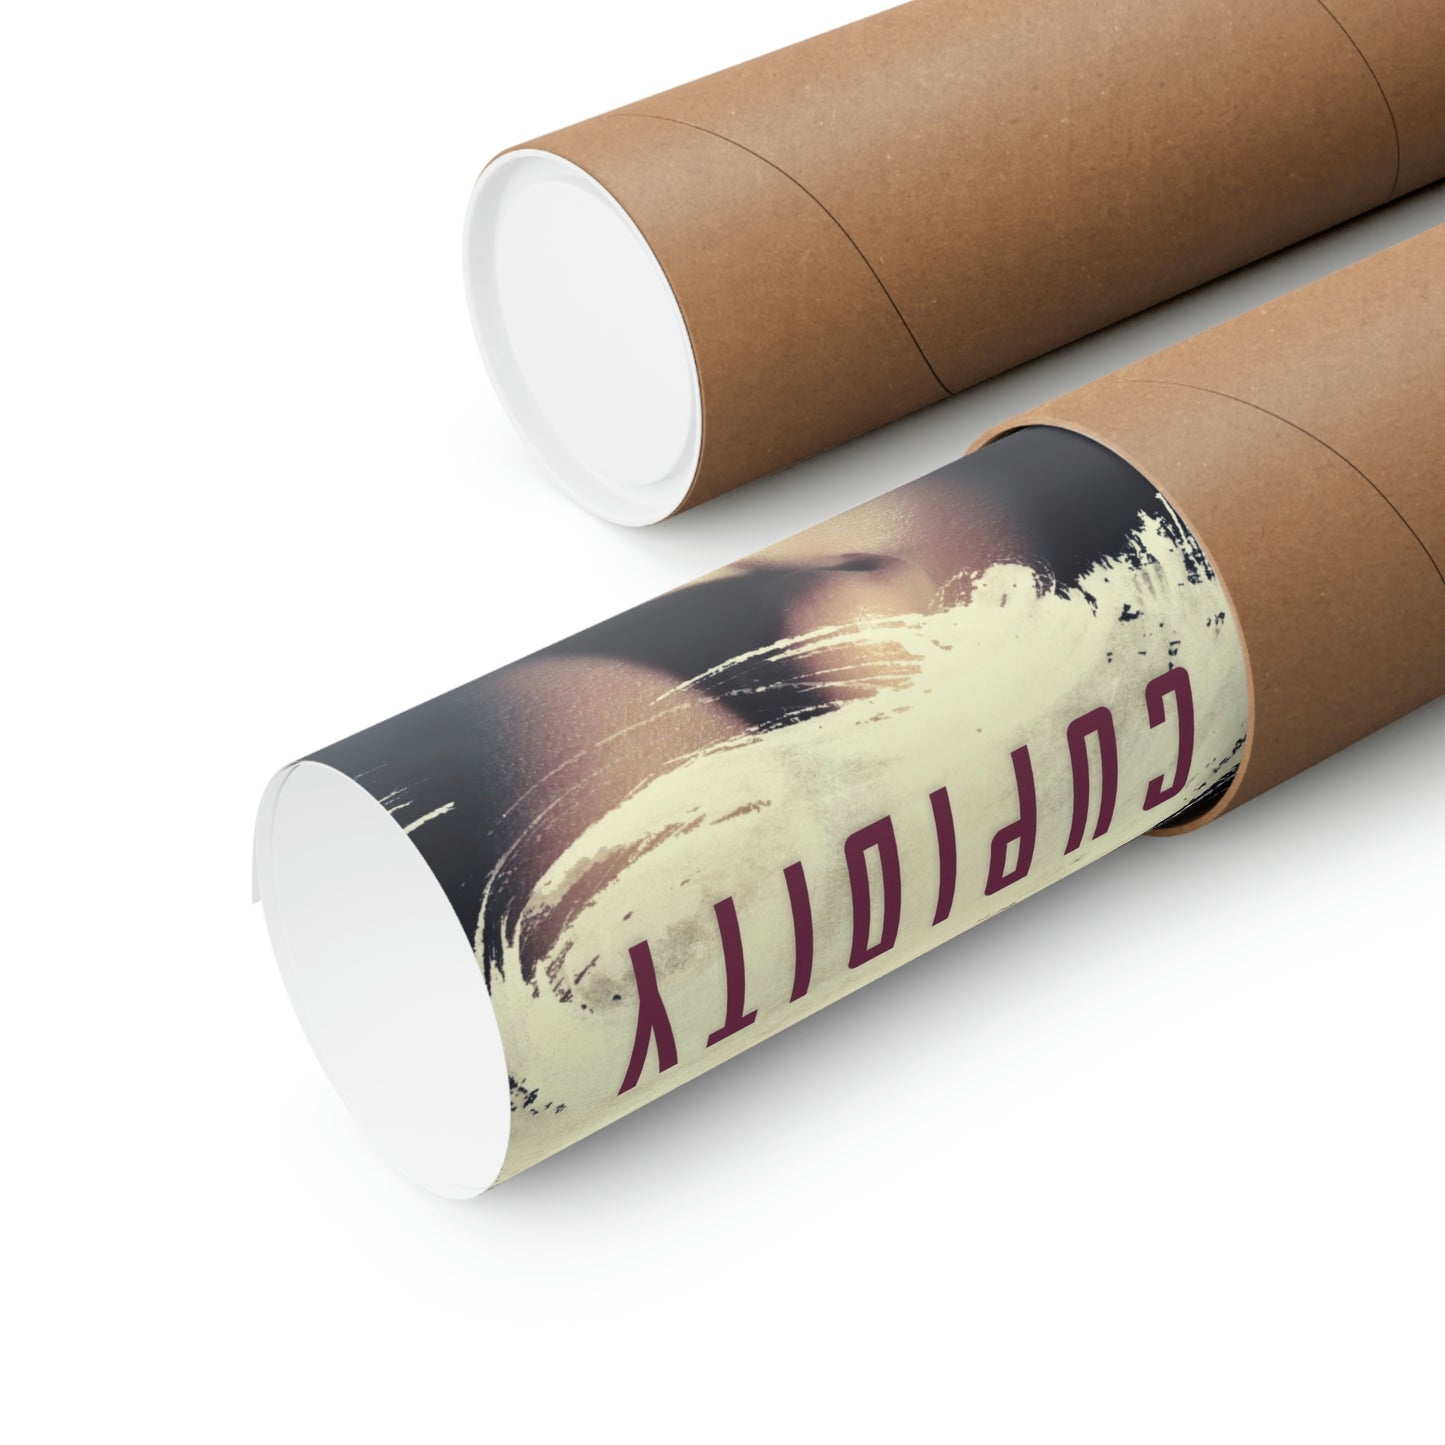 Cupidity - Matte Poster